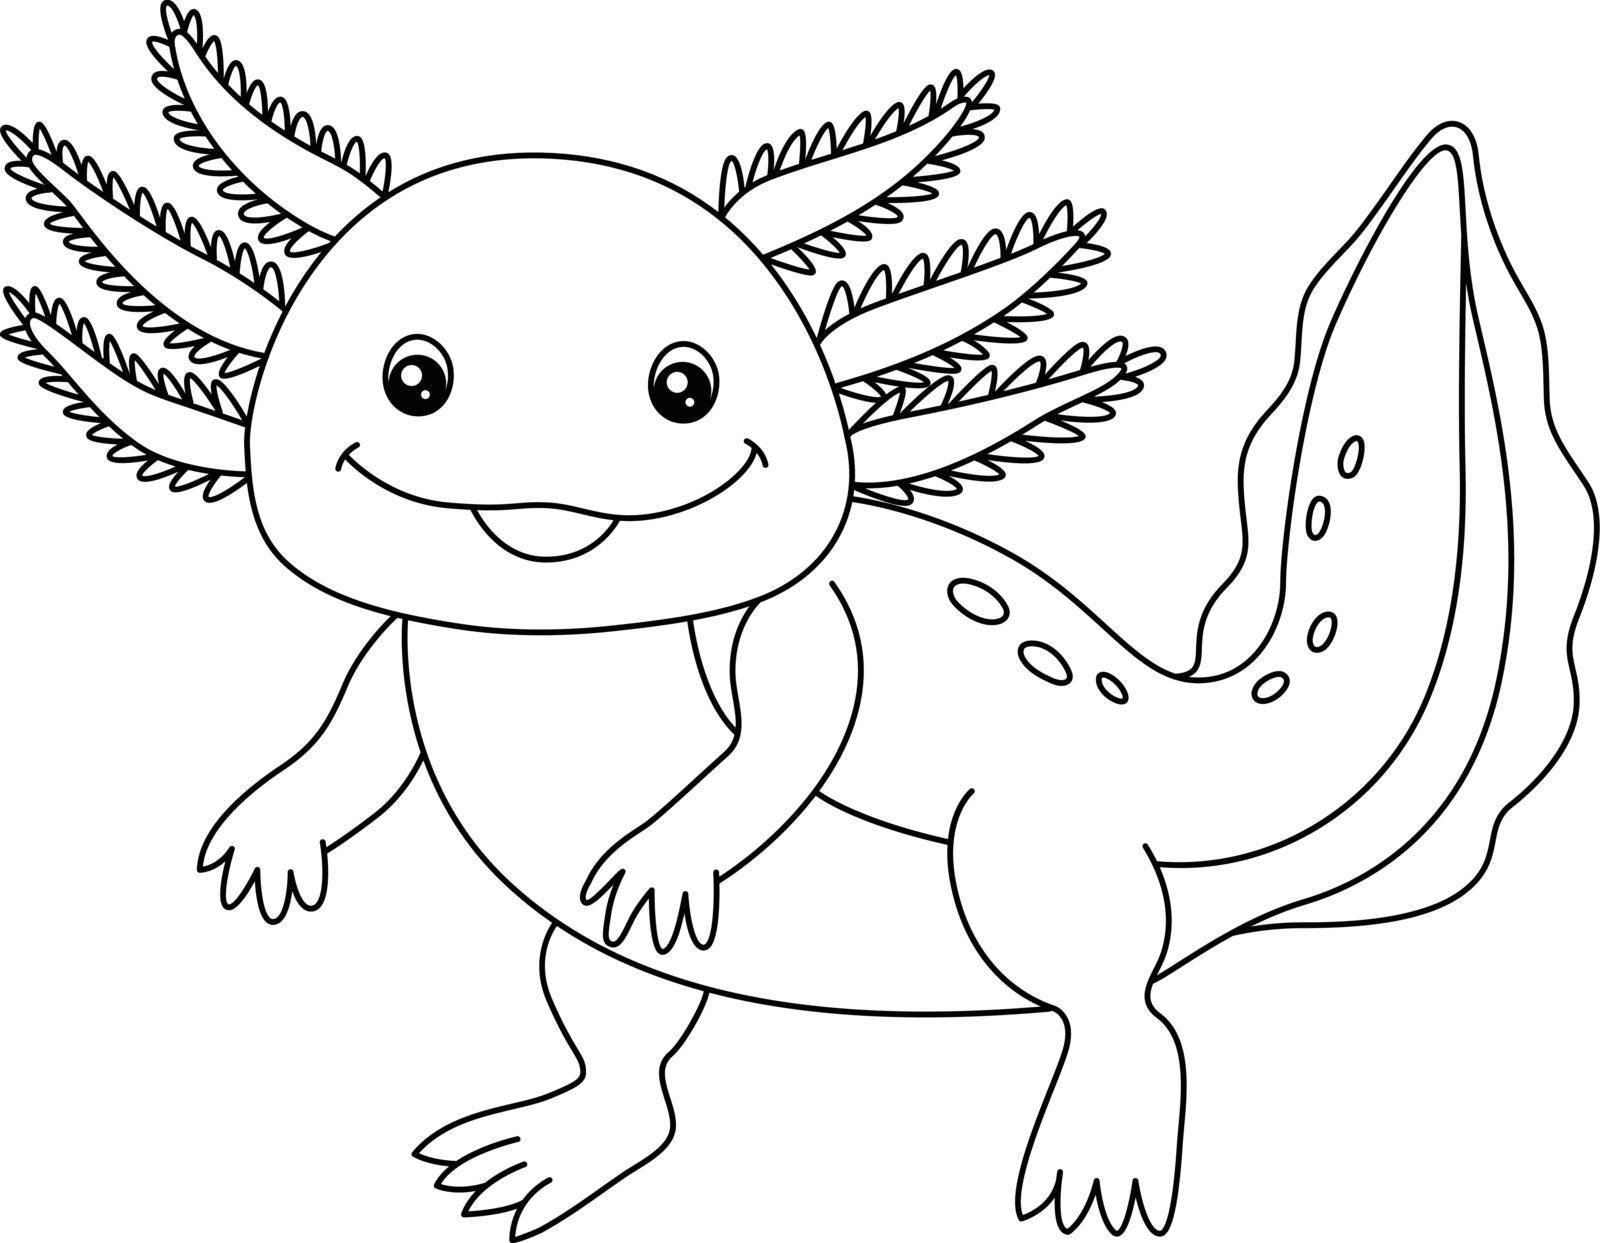 A cute and funny coloring page of an axolotl. Provides hours of coloring fun for children. To color, this page is very easy. Suitable for little kids and toddlers.